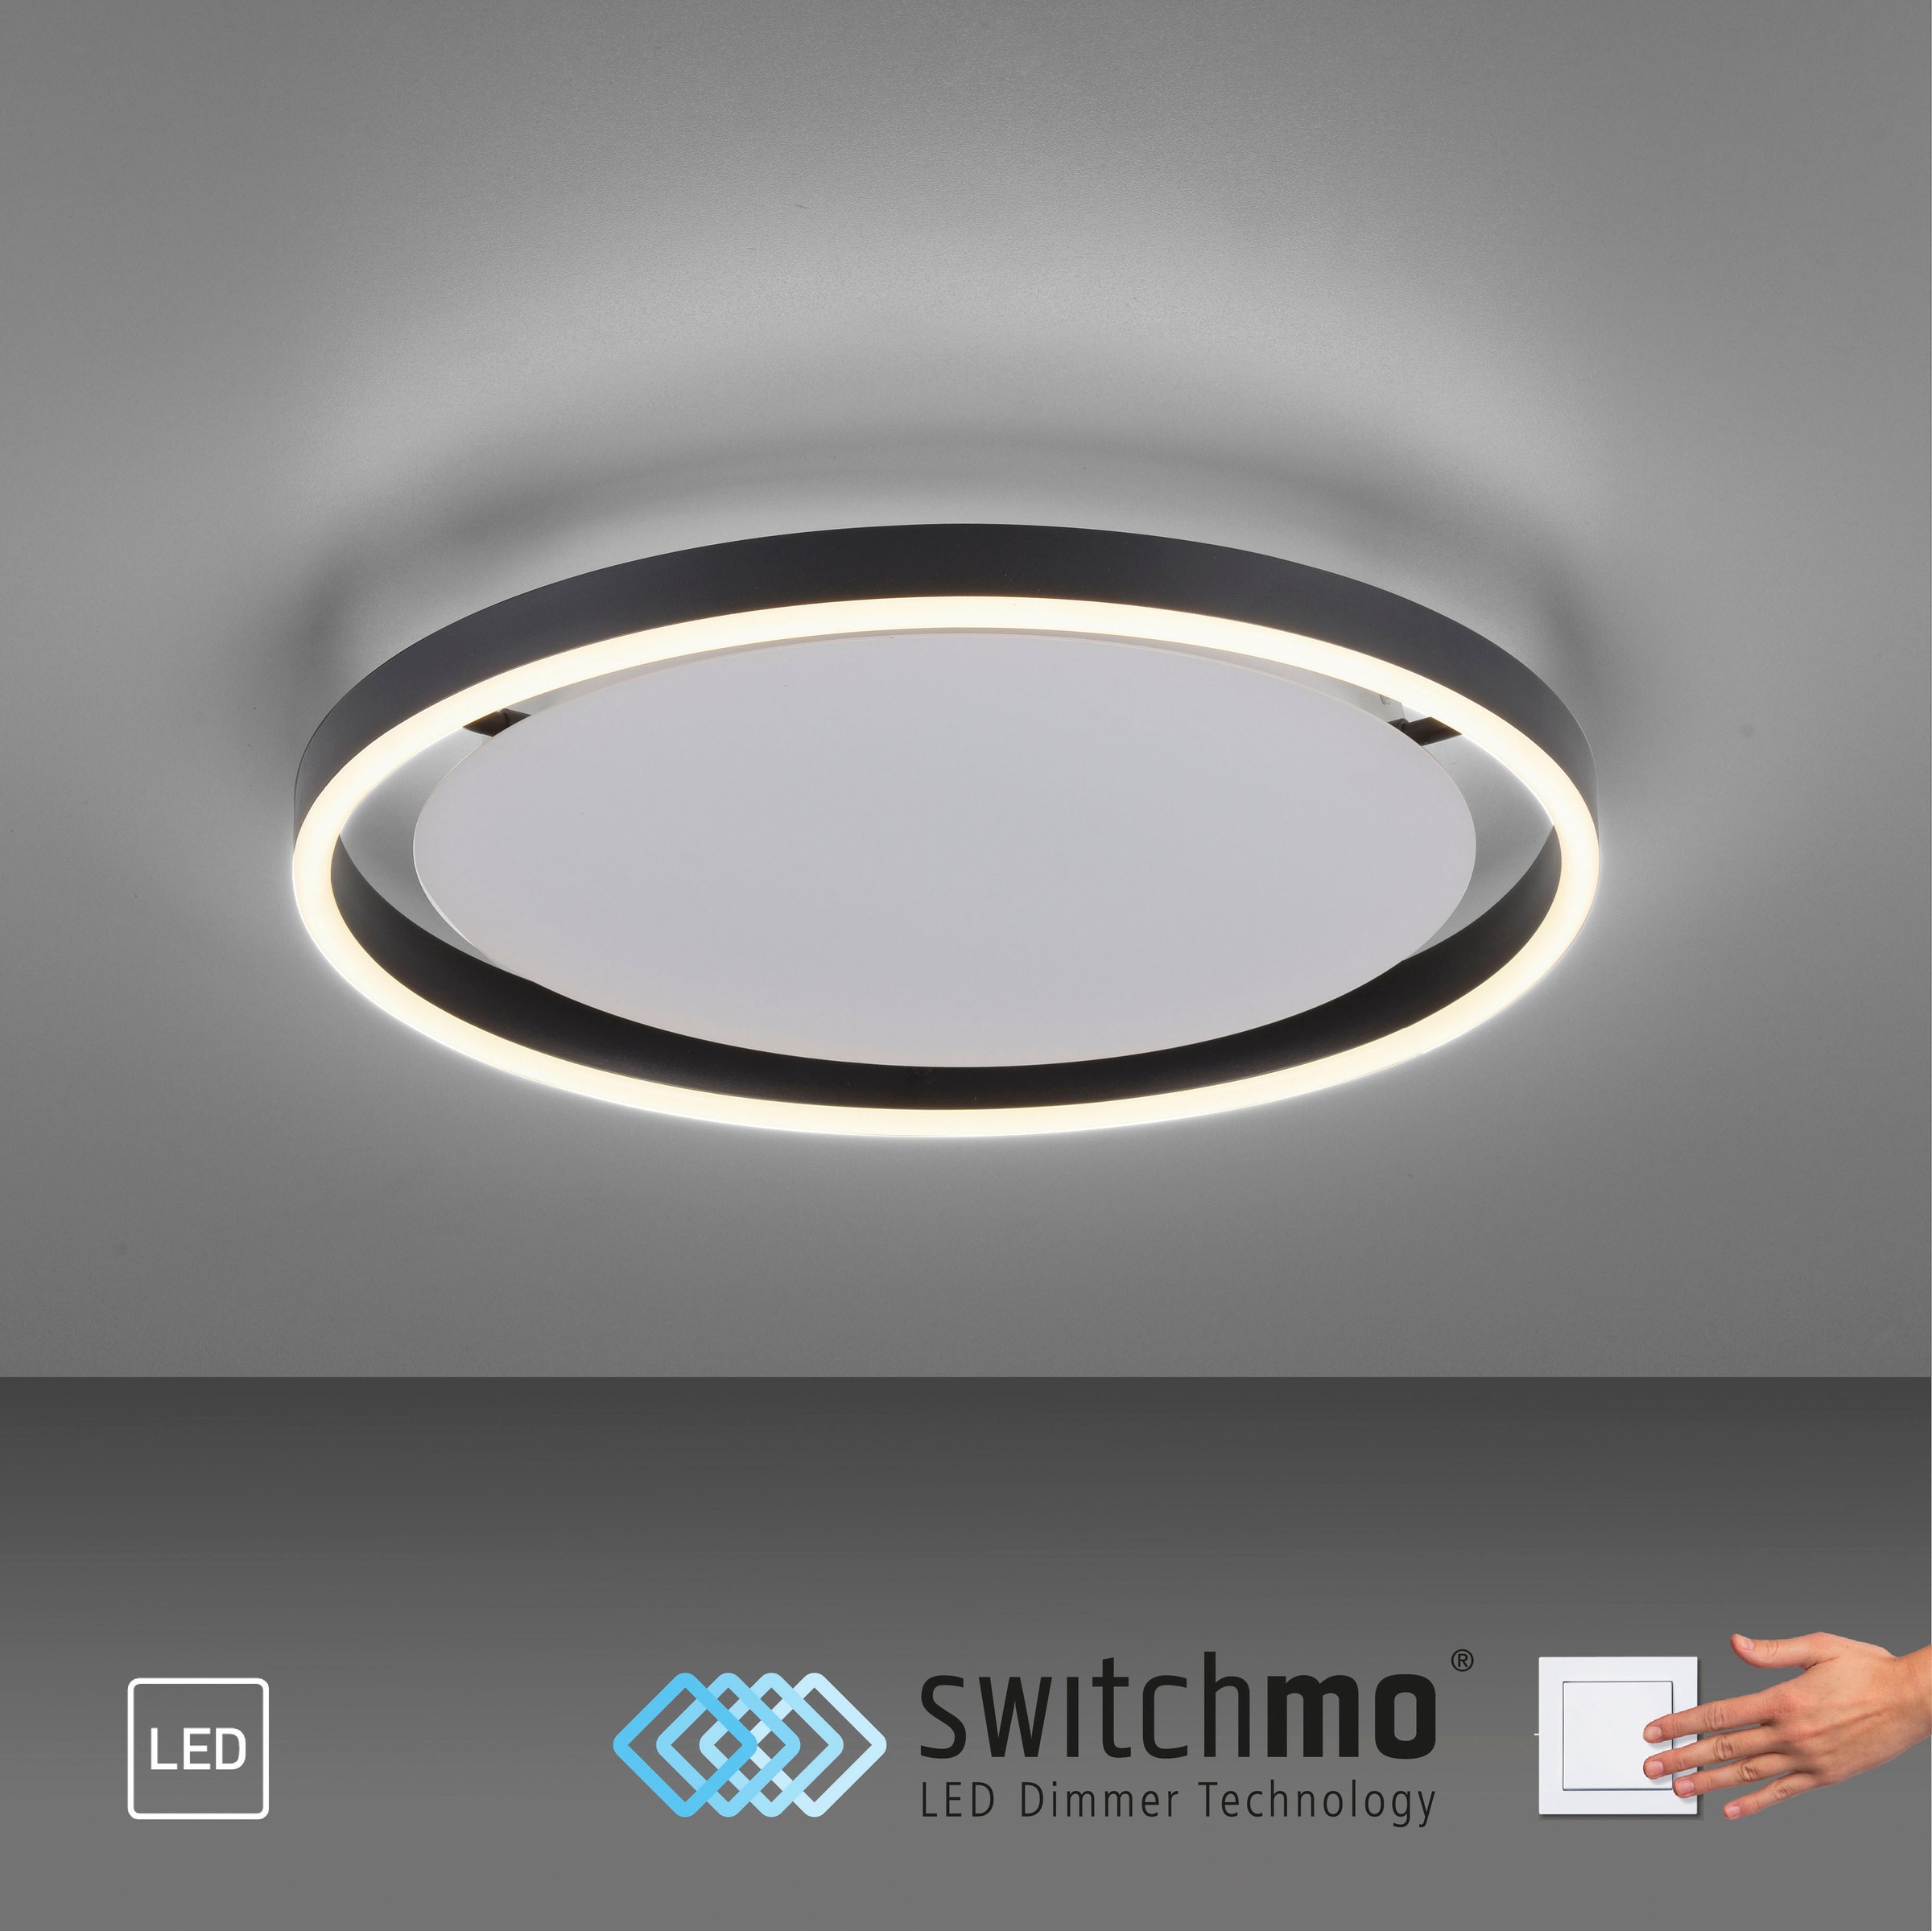 JUST LIGHT »RITUS«, Deckenleuchte Switchmo LED, dimmbar, BAUR flammig-flammig, Switchmo, 1 | dimmbar